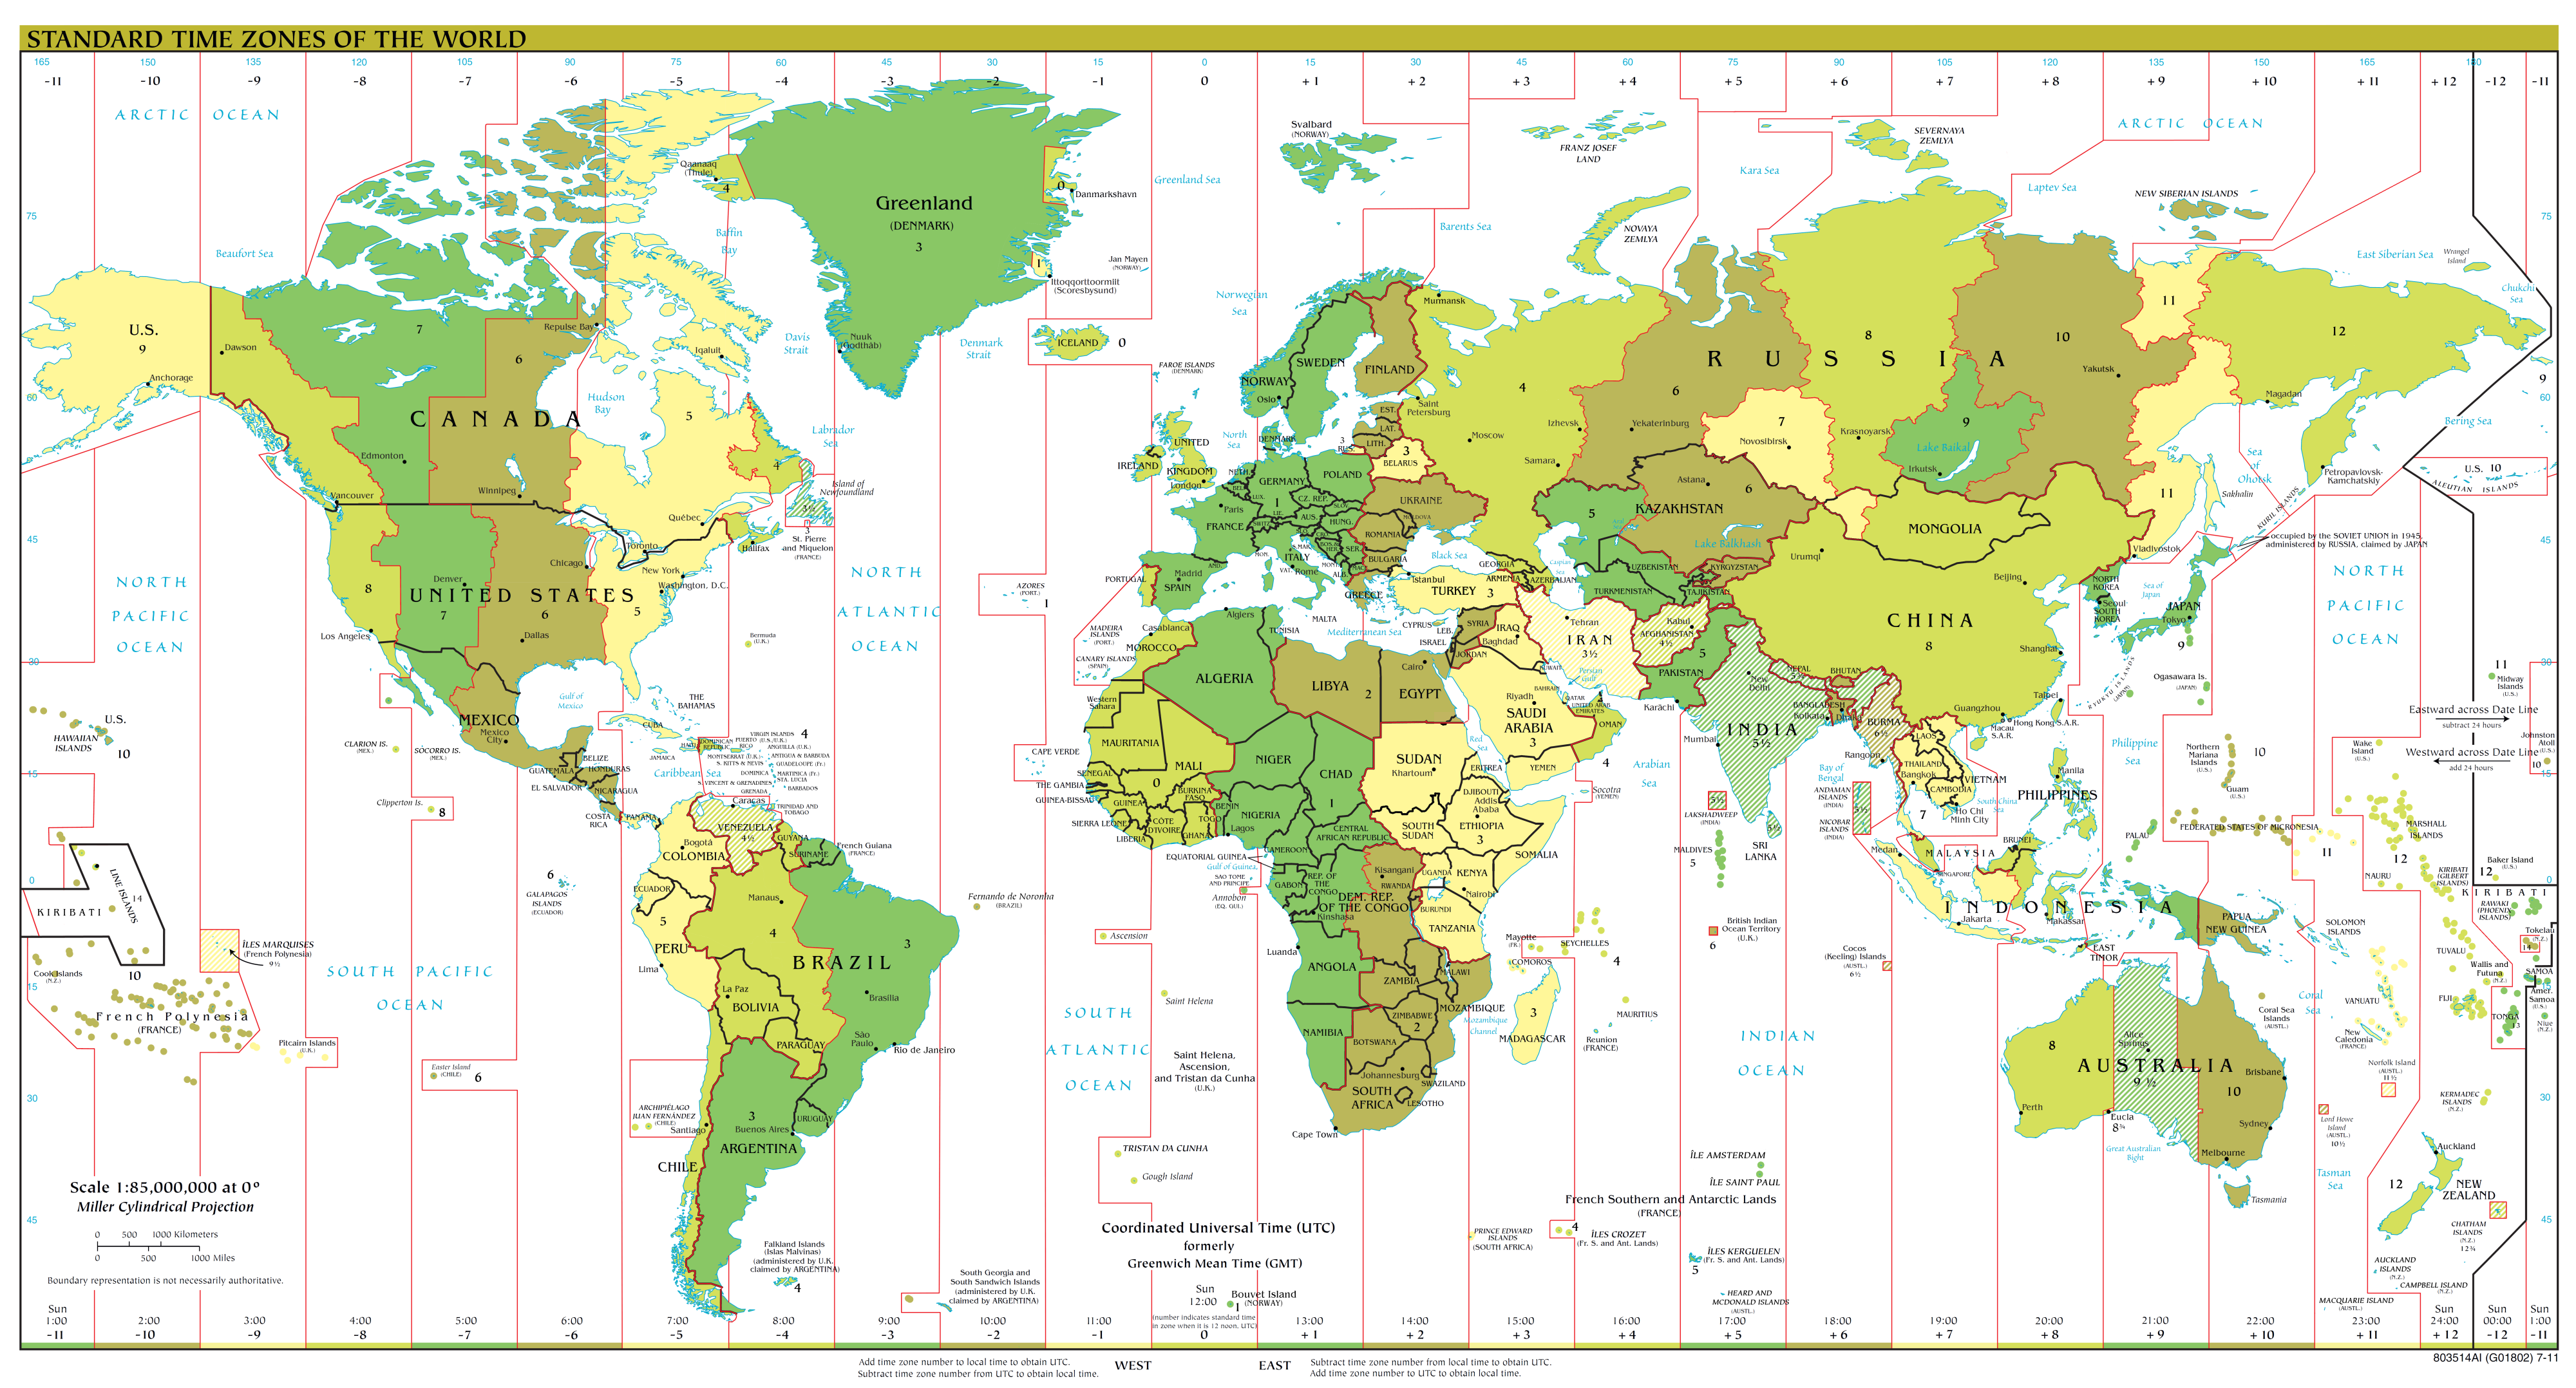 Time zones depicted not as straight lines but as following boundaries, or internal divisions for larger countries